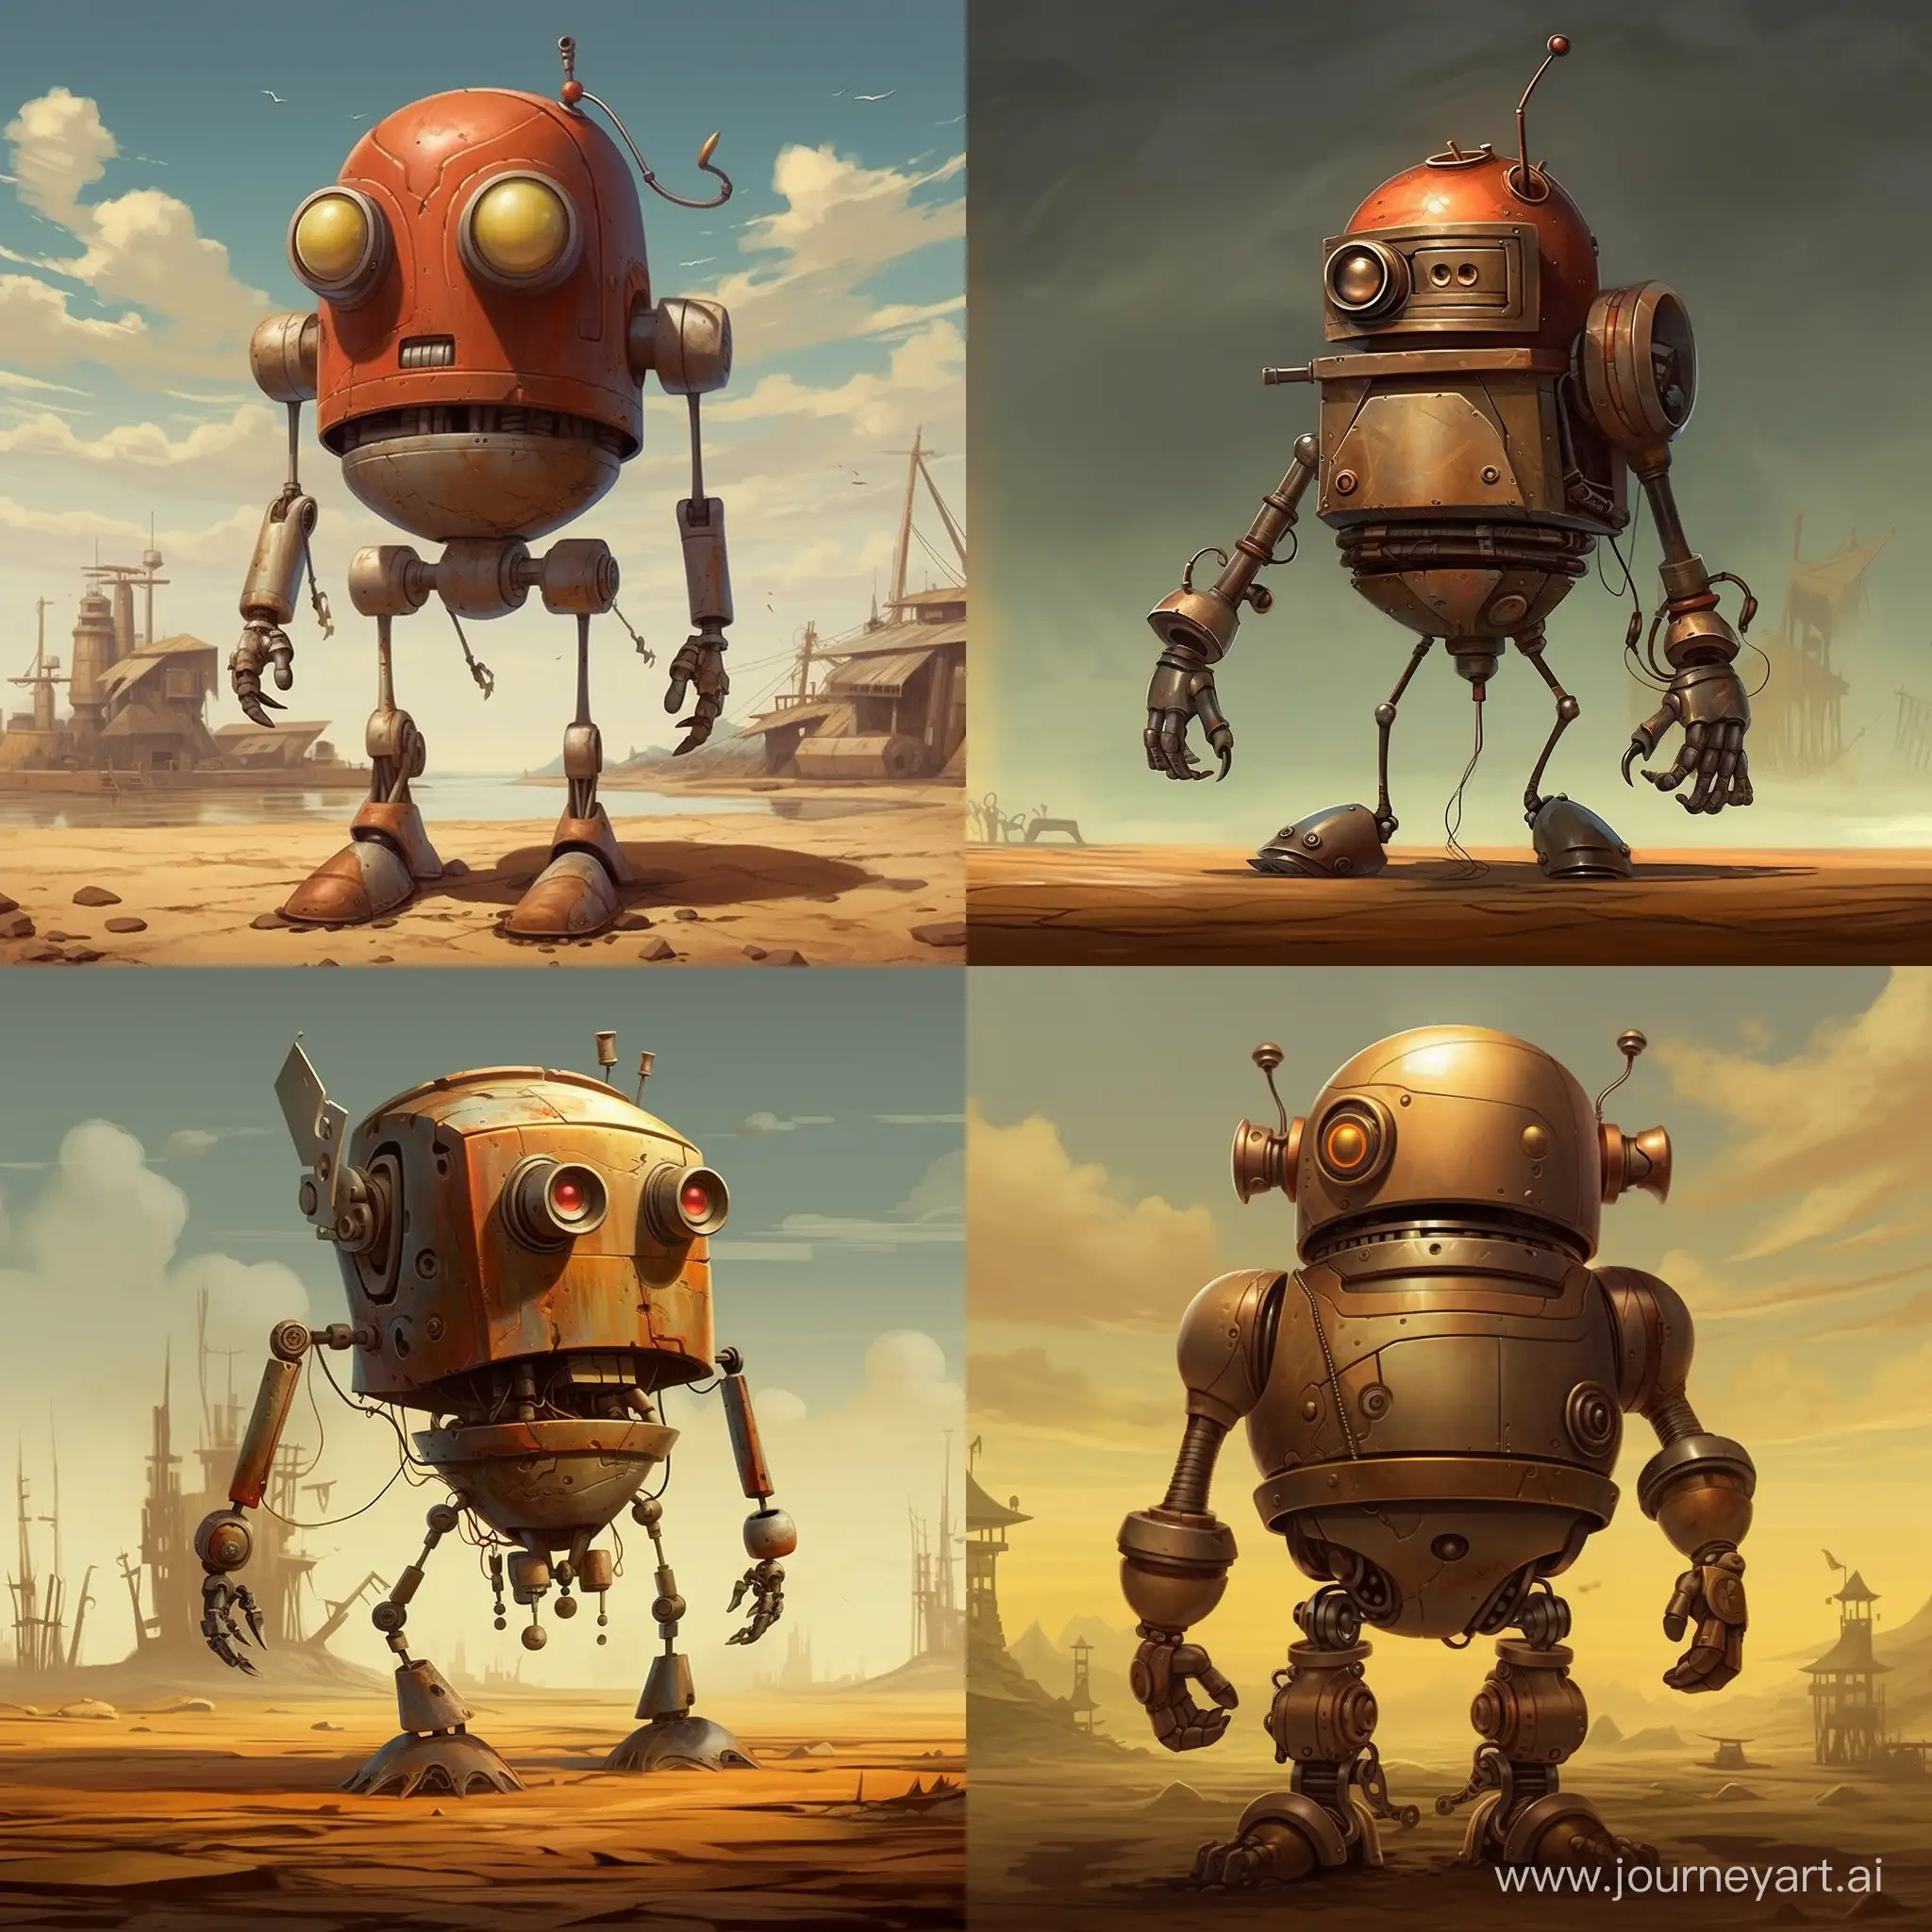 Whimsical-Robot-Delights-Playful-Android-in-the-Style-of-Brian-Despain